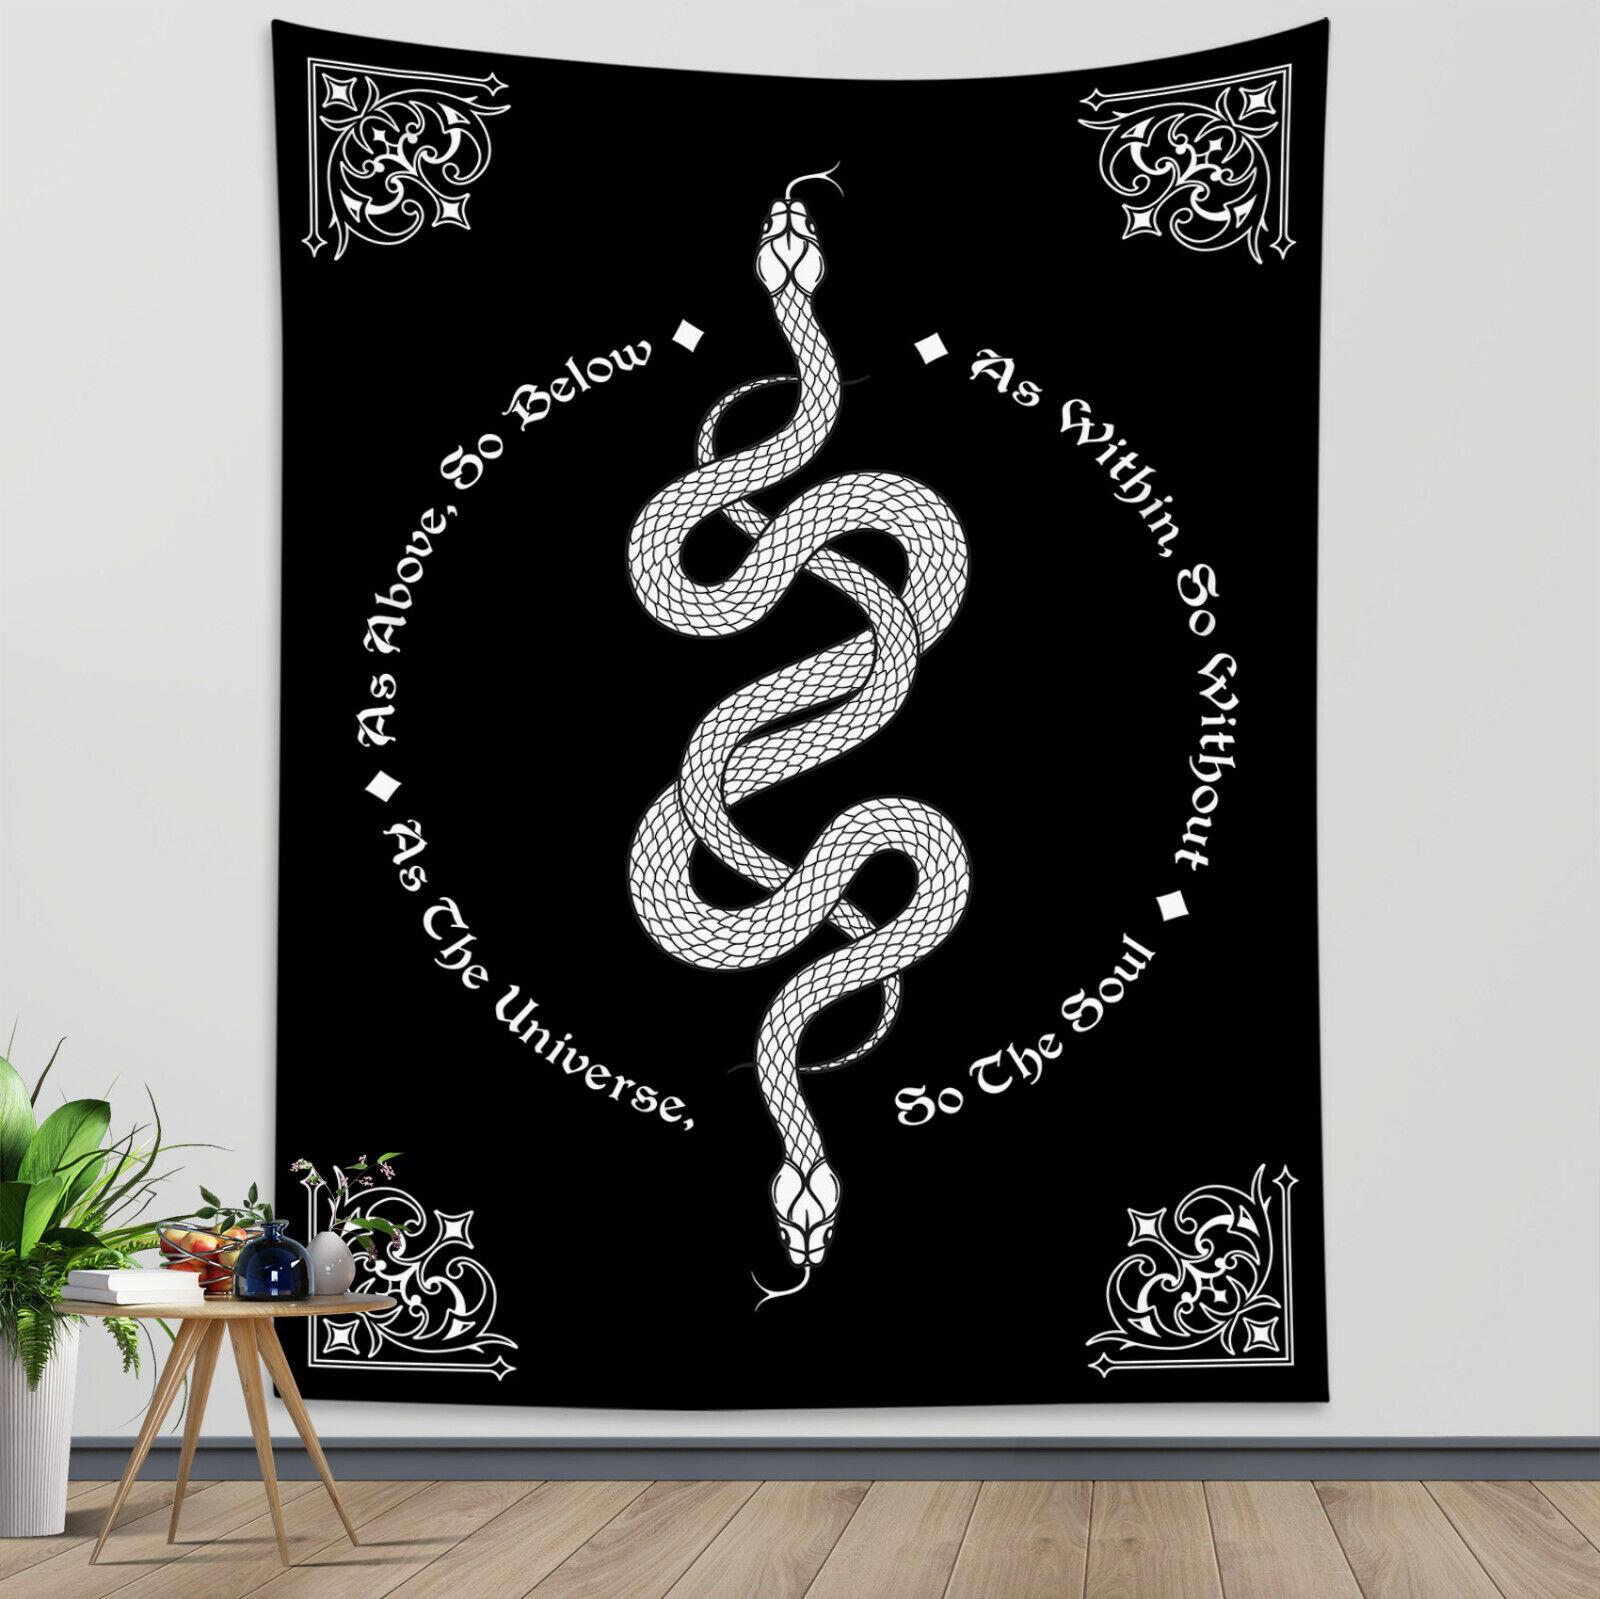 Black White Snake Tapestry Gothic Witchy Wall Hanging For Living